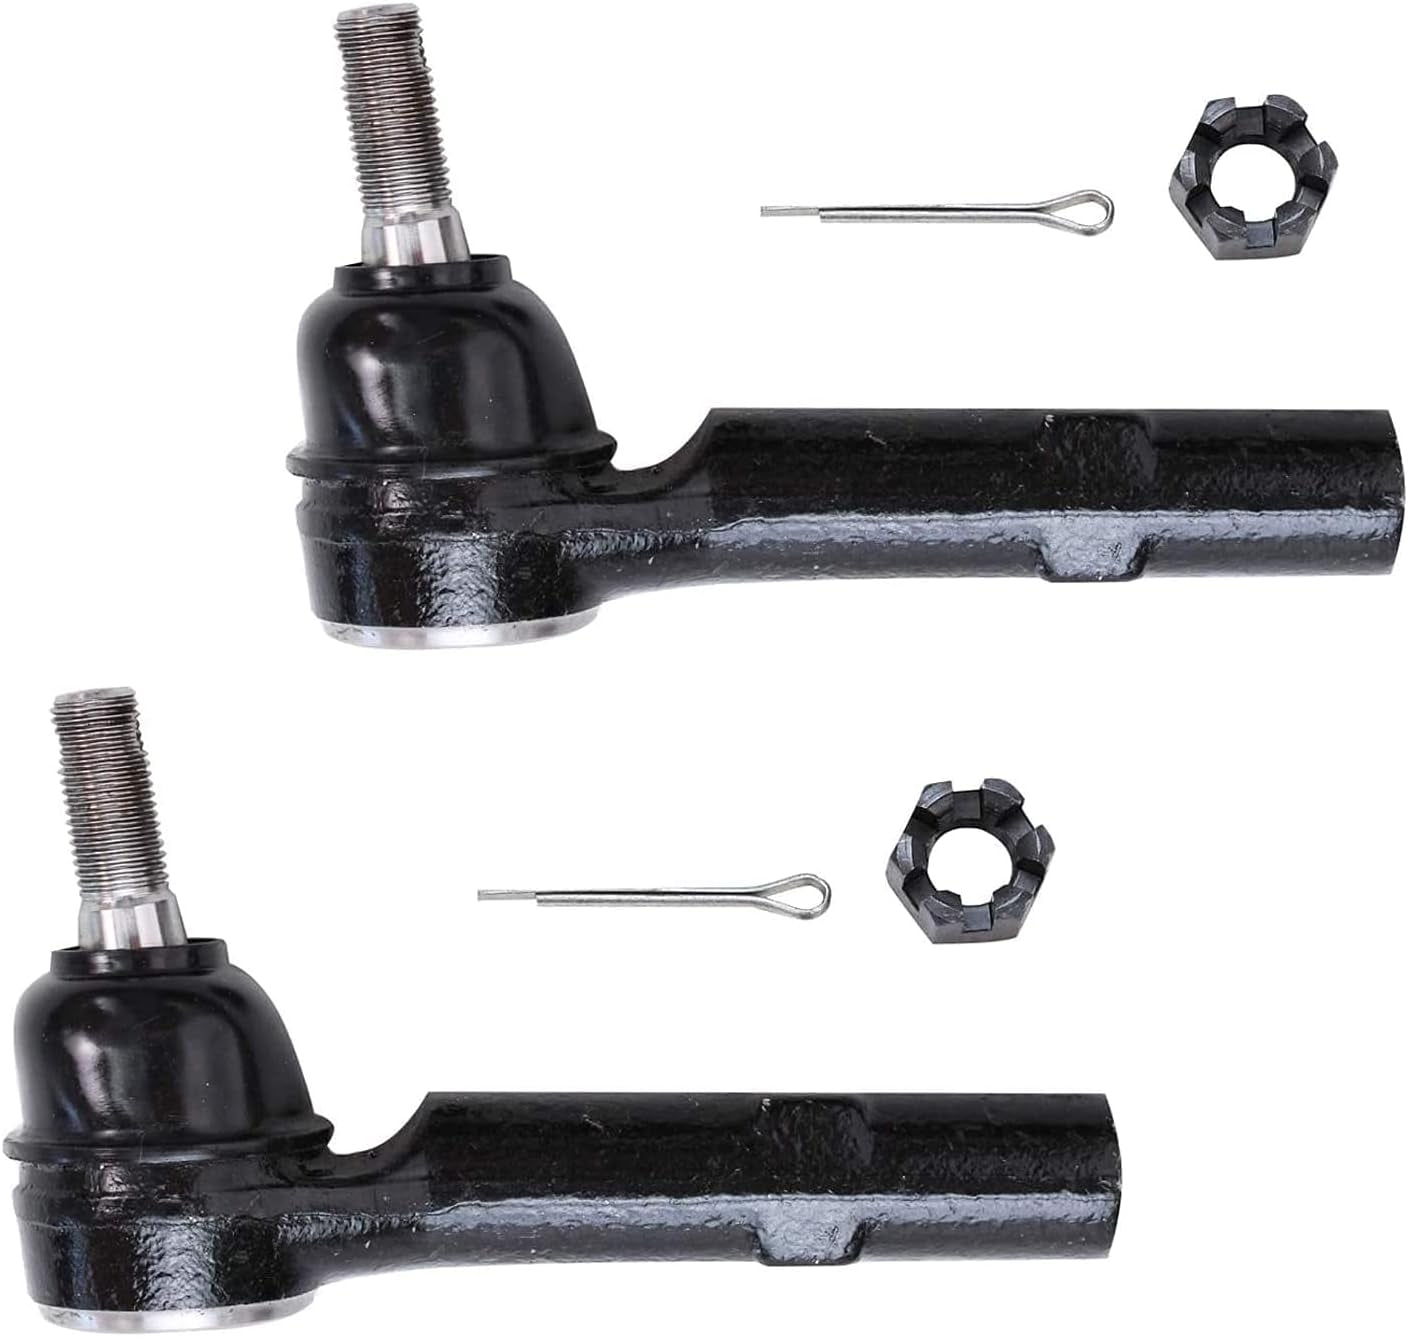 Detroit Axle - Front 6Pc Struts Kit for GMC Acadia Chevy Traverse Buick Enclave Saturn Outlook, 2 Struts and Coil Springs 2 Tie Rods 2 Sway Bar End Links Replacement Suspension